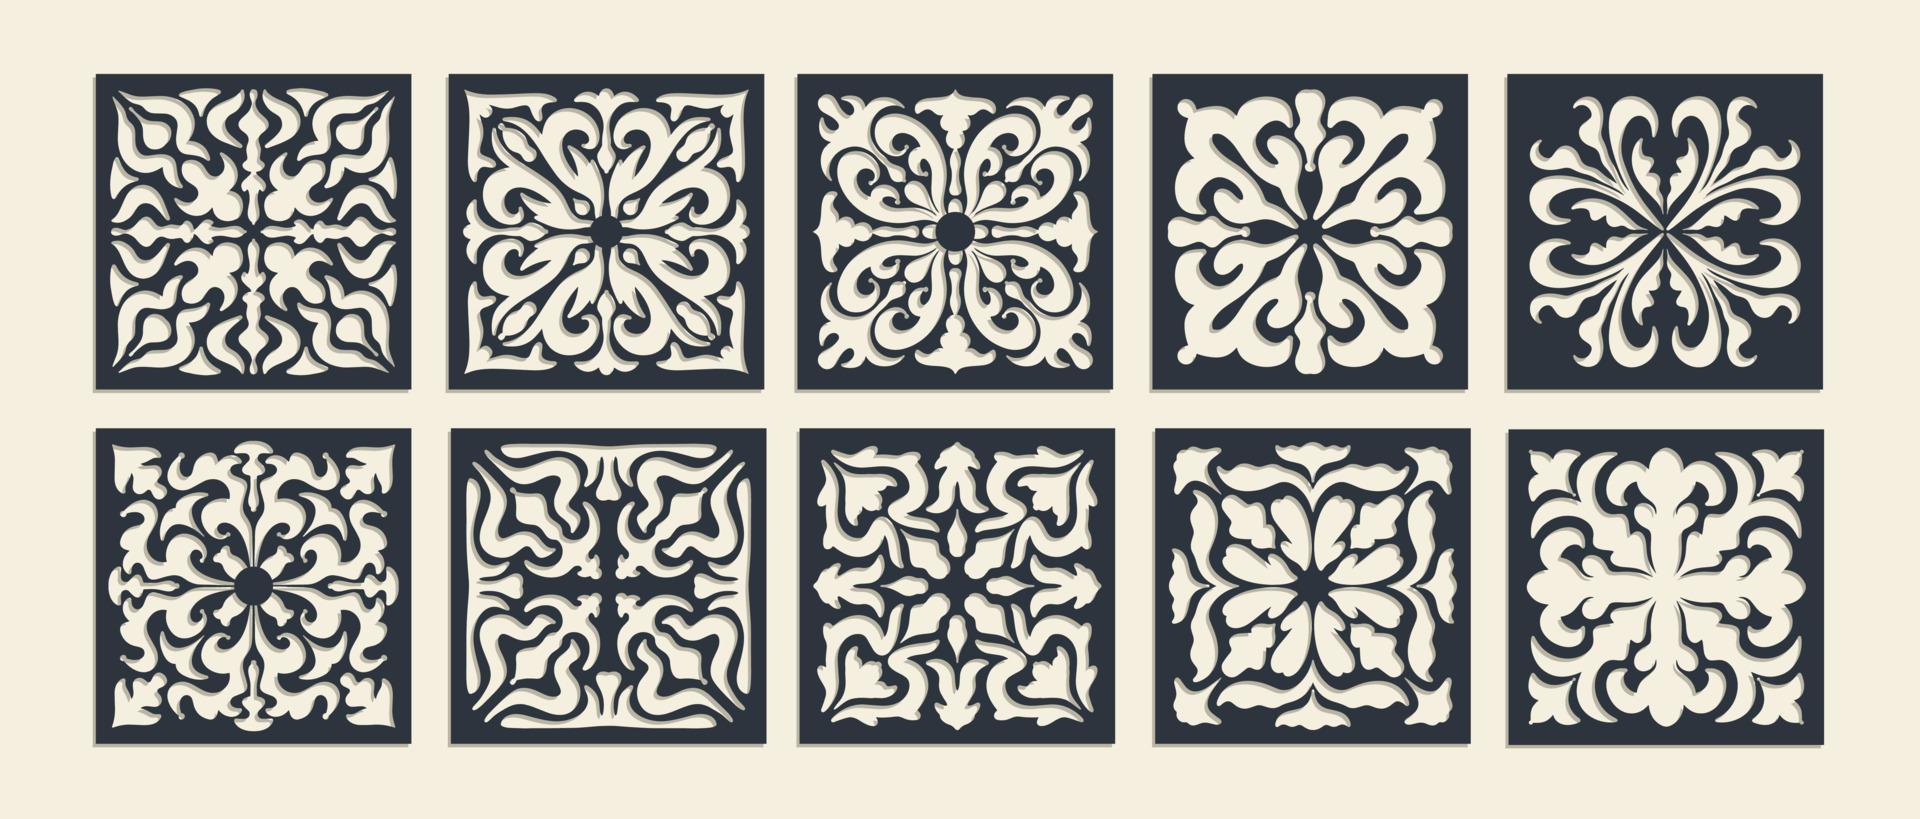 Big set of square Vintage Laser Cut pattern with baroque ornament. Vector Stencil Template for cnc cutting, decorative panels of wood, metal, paper, plastic